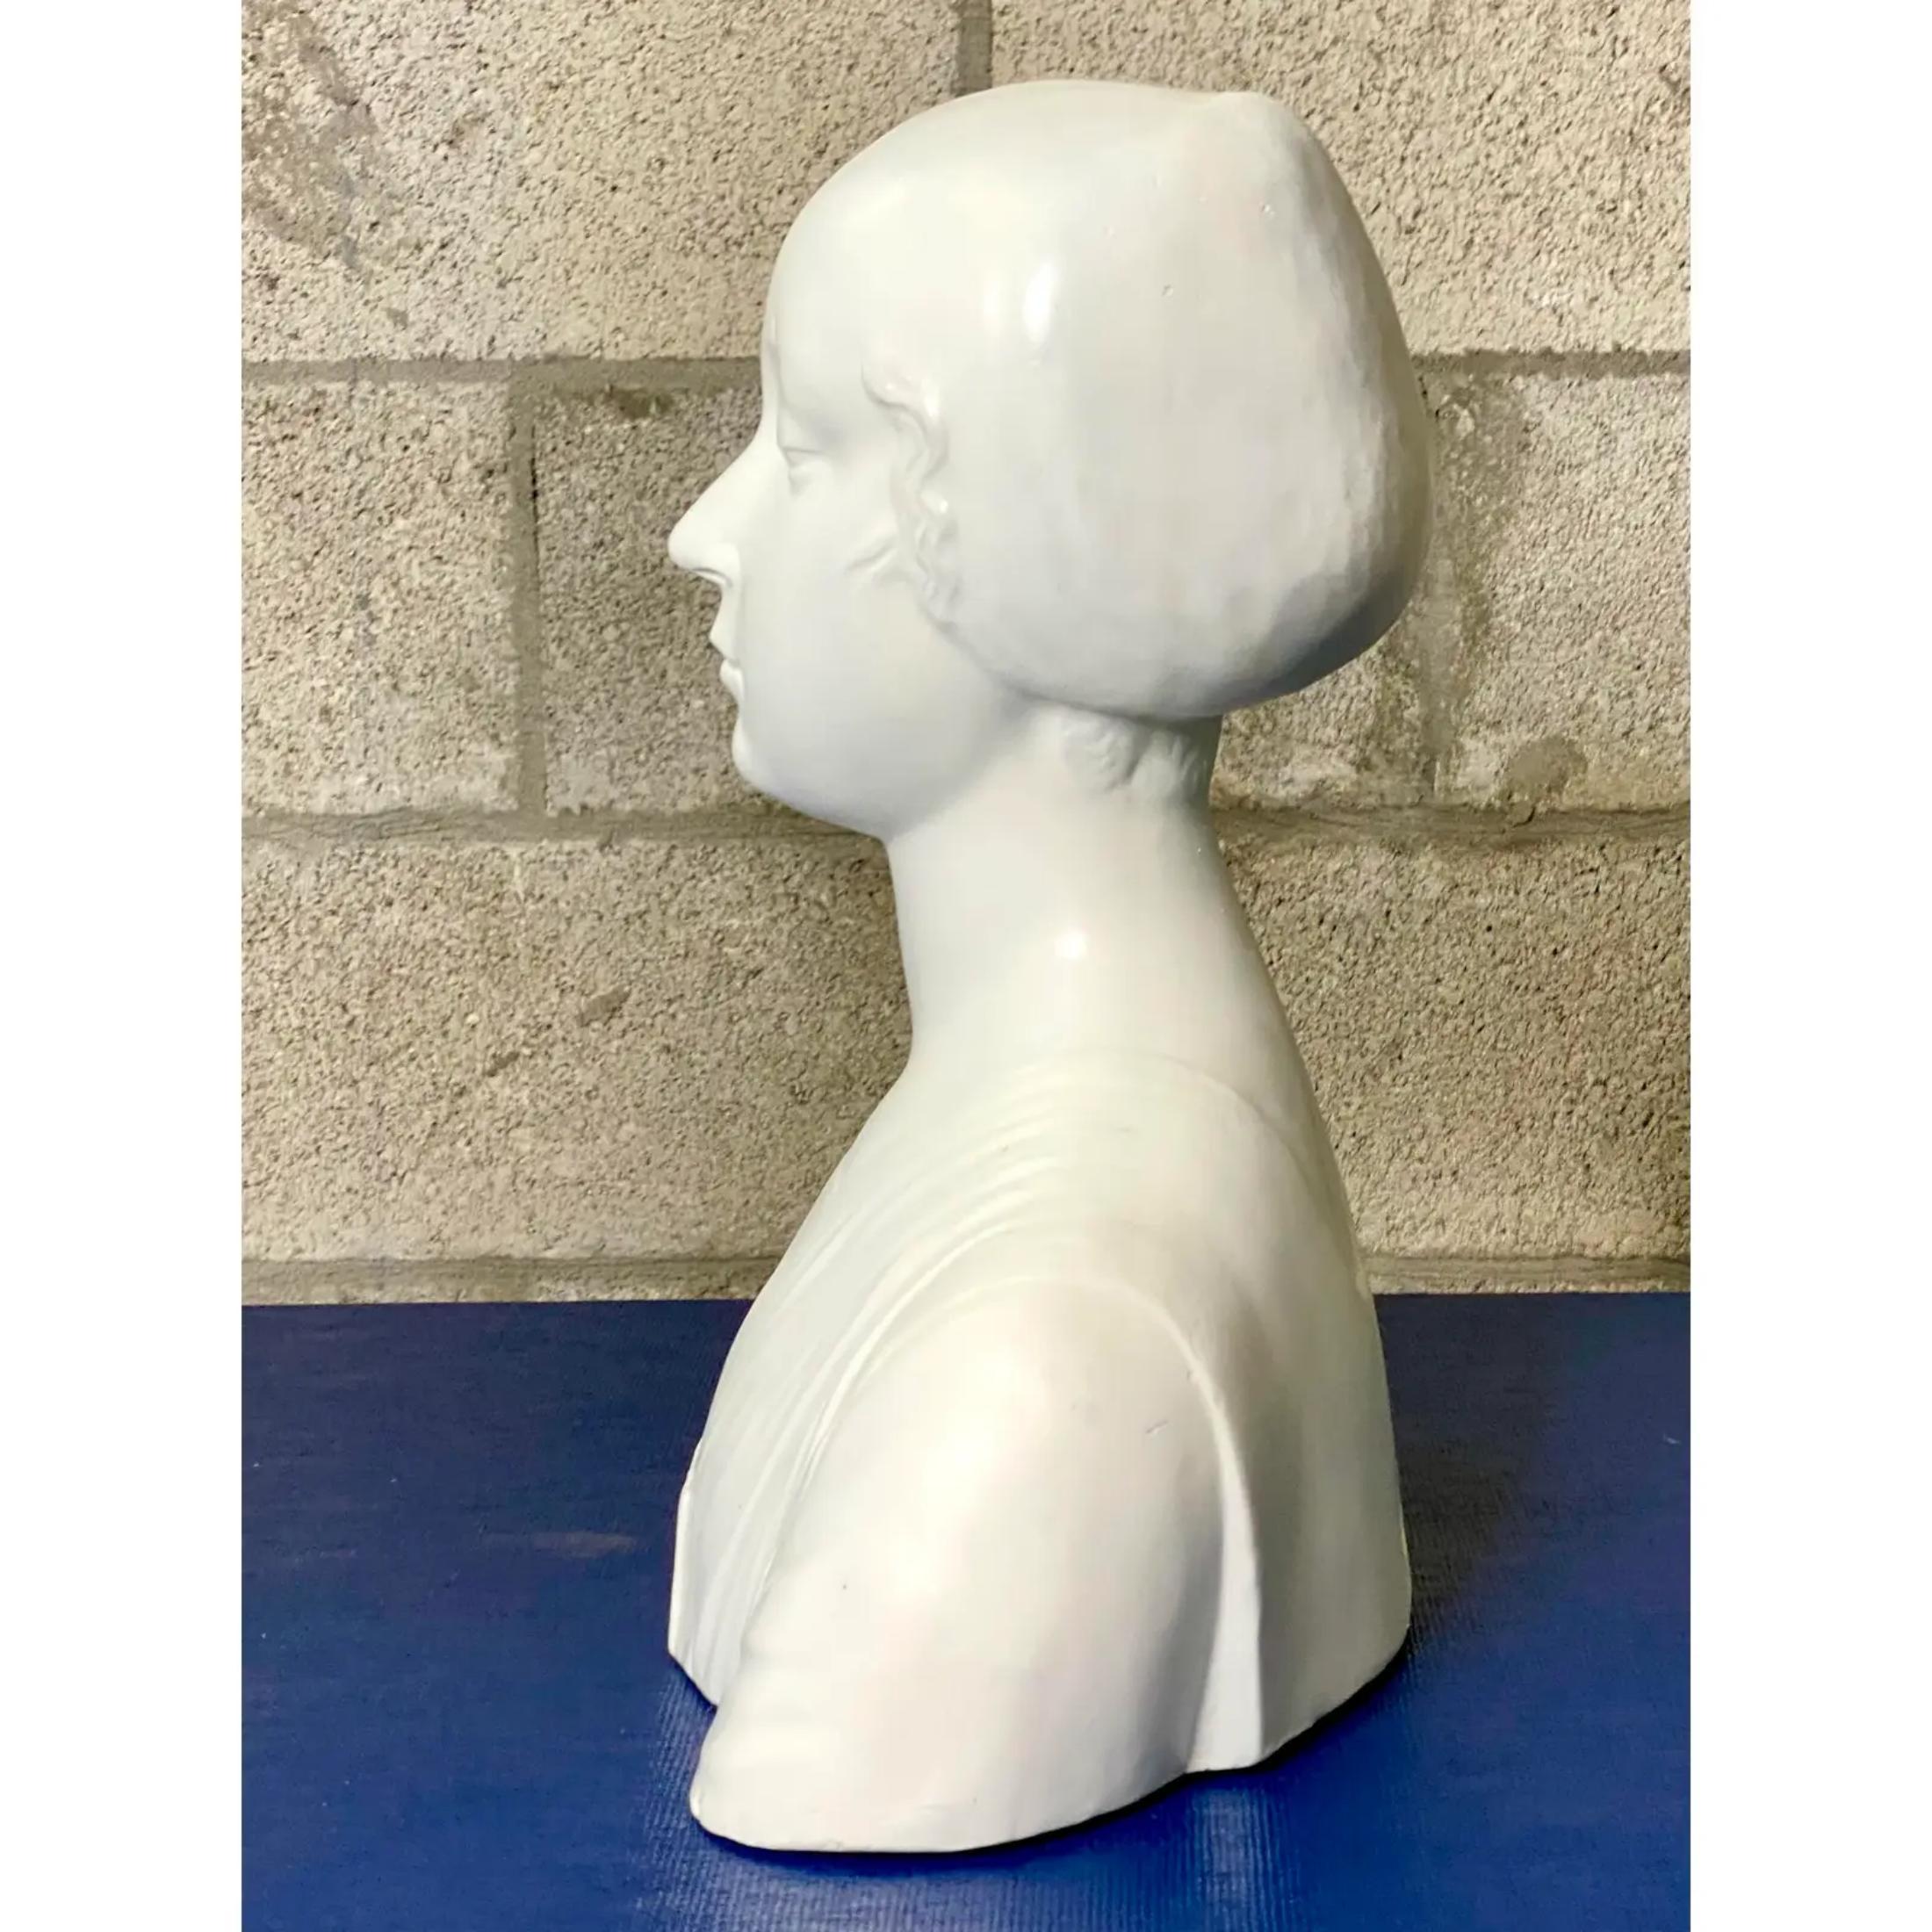 Gorgeous vintage plaster bust of female. Simple and chic sculpture. Makers mark in the back. Acquired from a Deal estate.